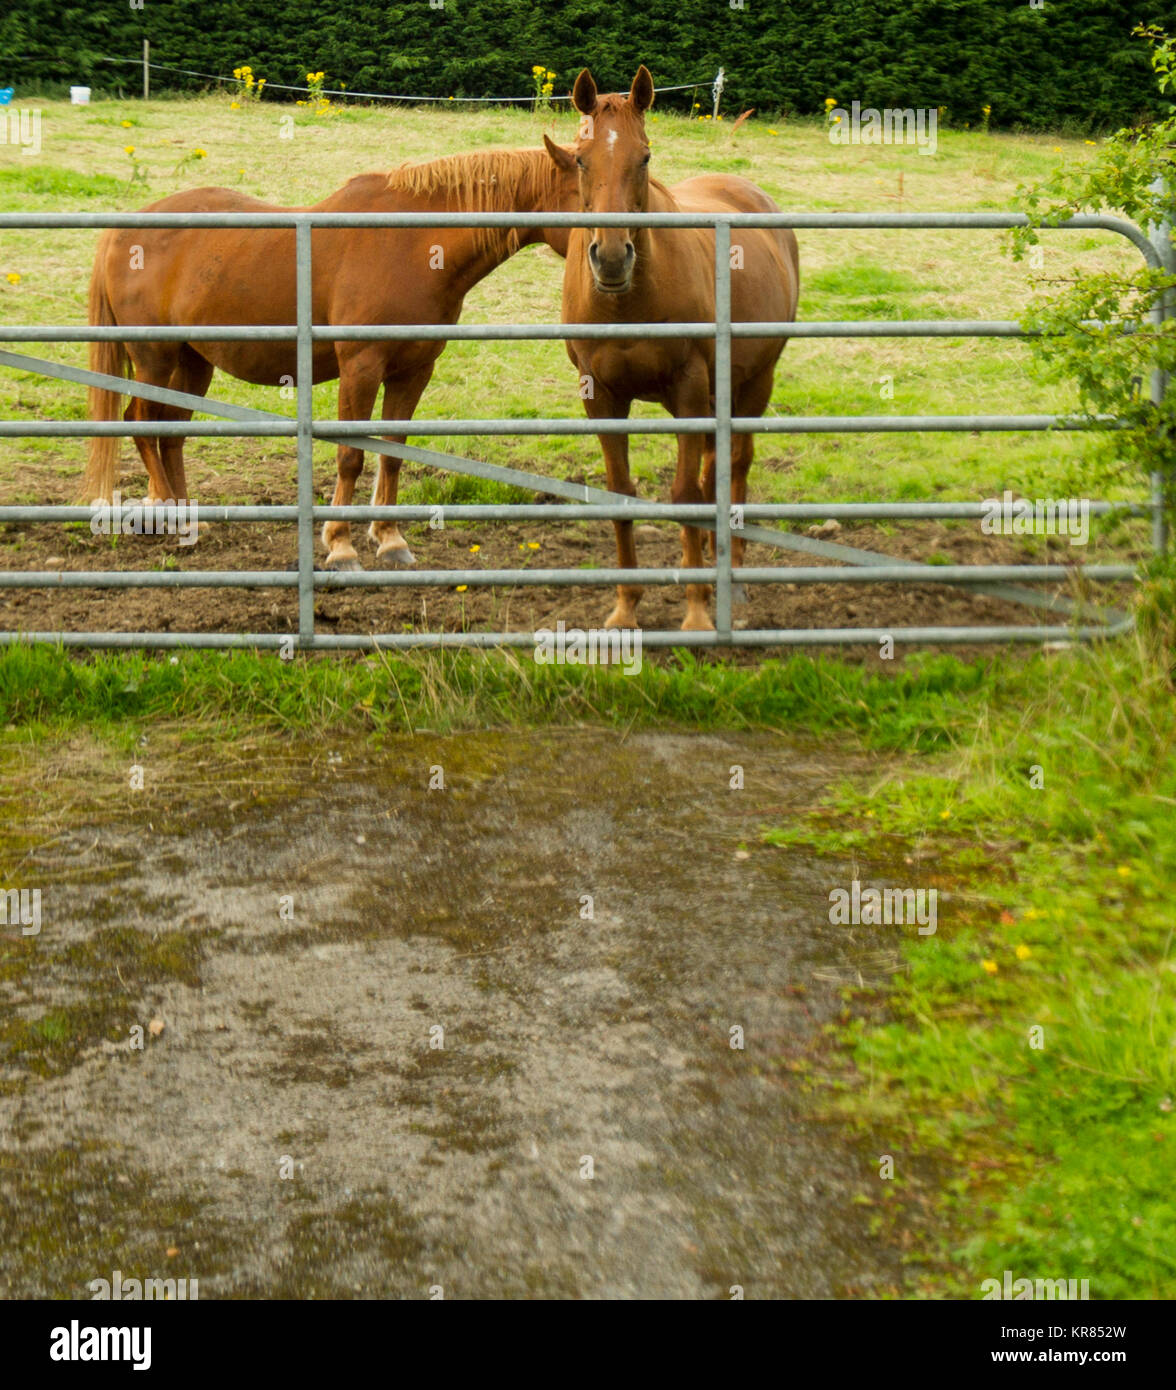 Two brown horses standing in a field behind a barred metal gate Stock Photo